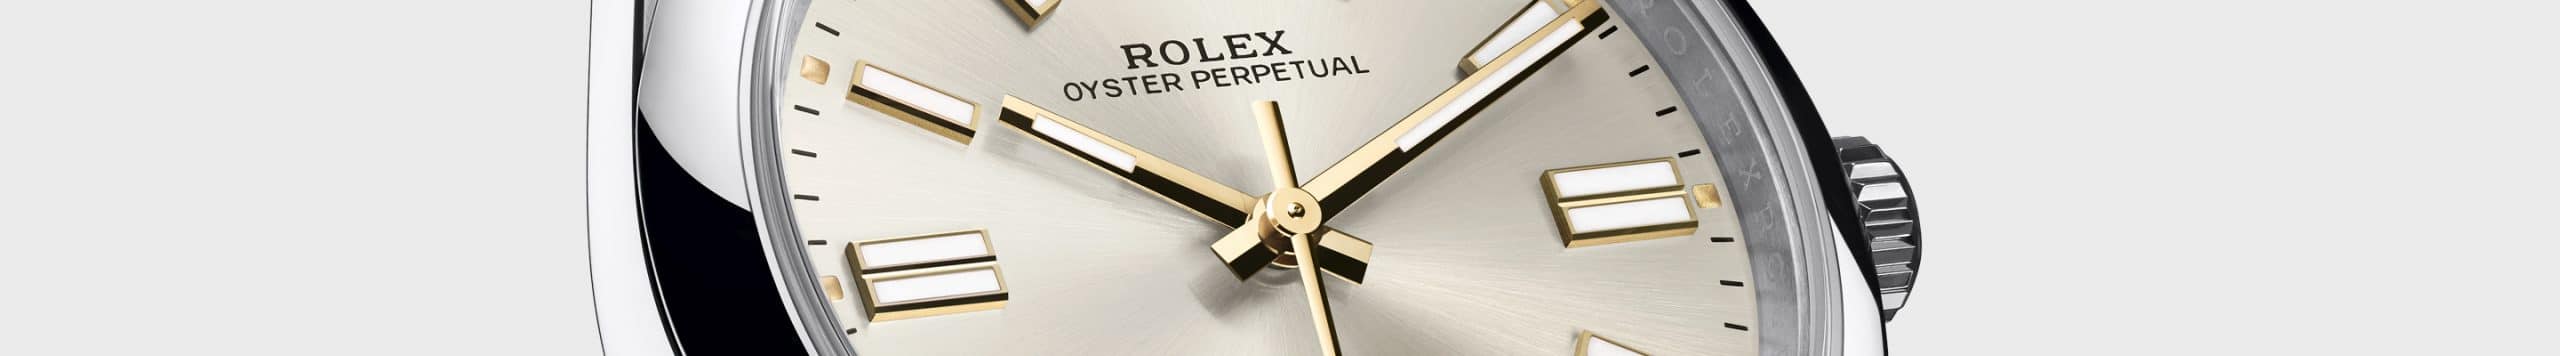 Rolex Oyster Perpetual | Rolex Official Retailer - Siam Swiss